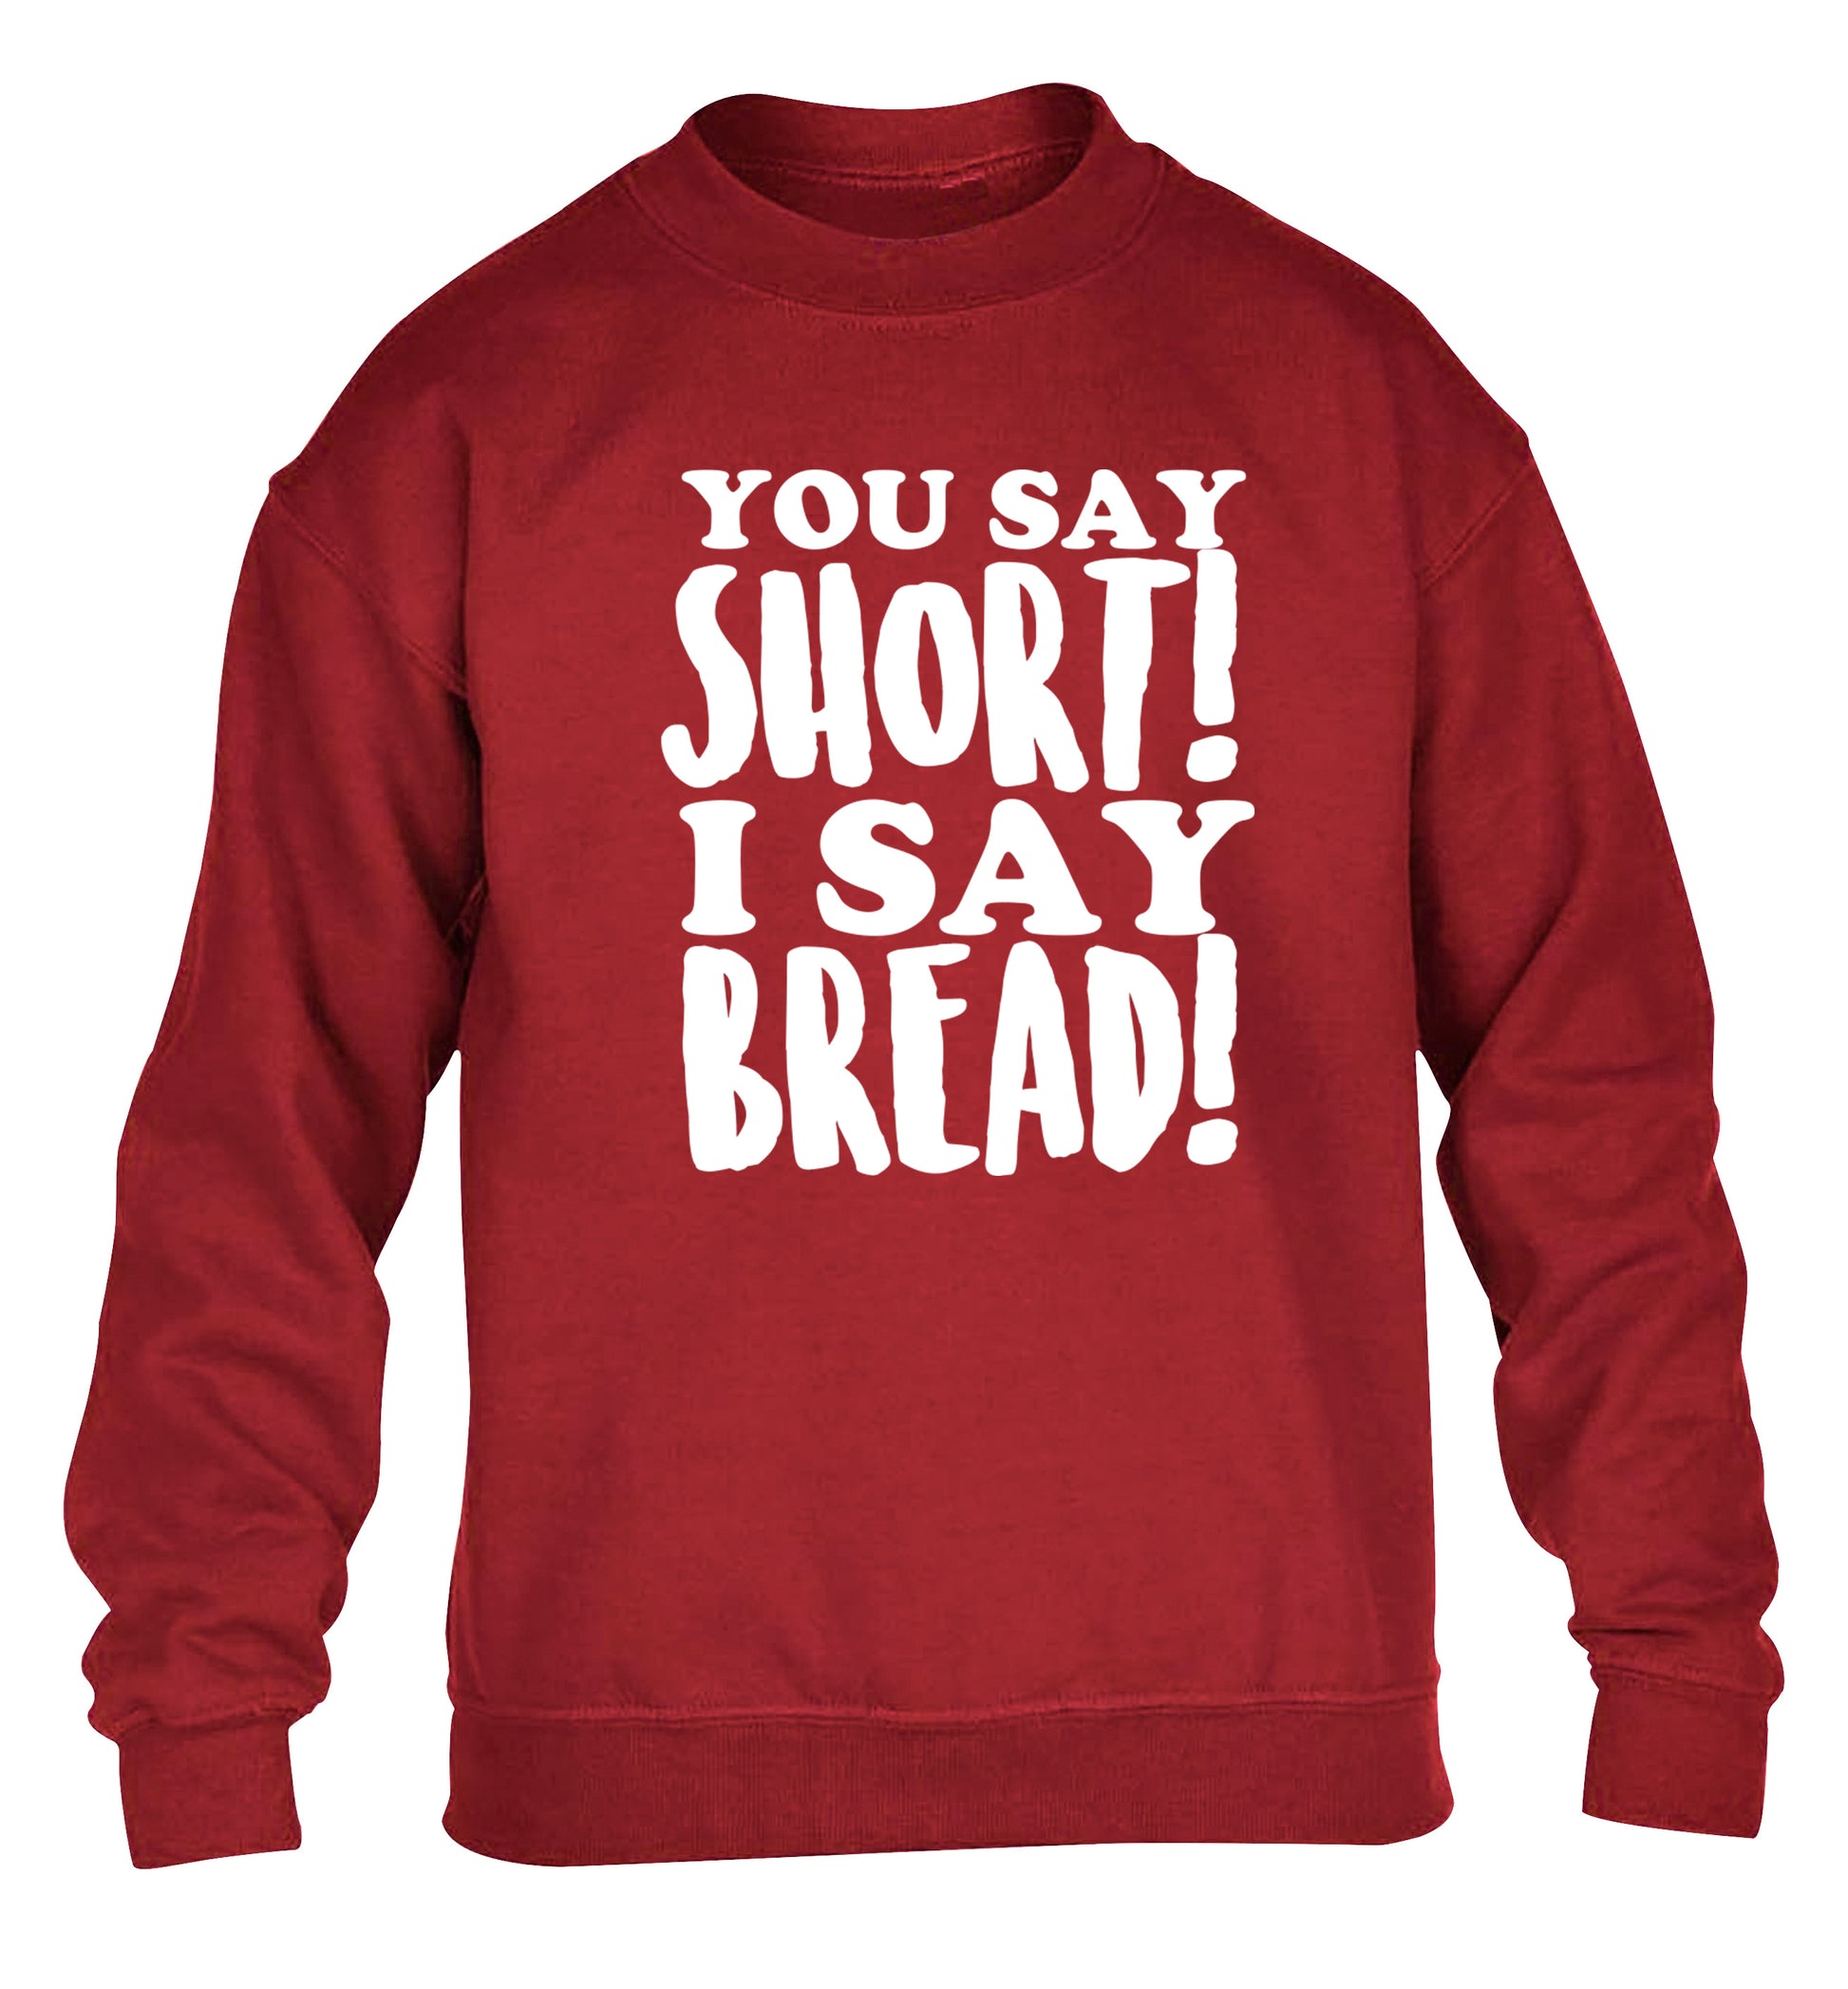 You say short I say bread! children's grey sweater 12-14 Years